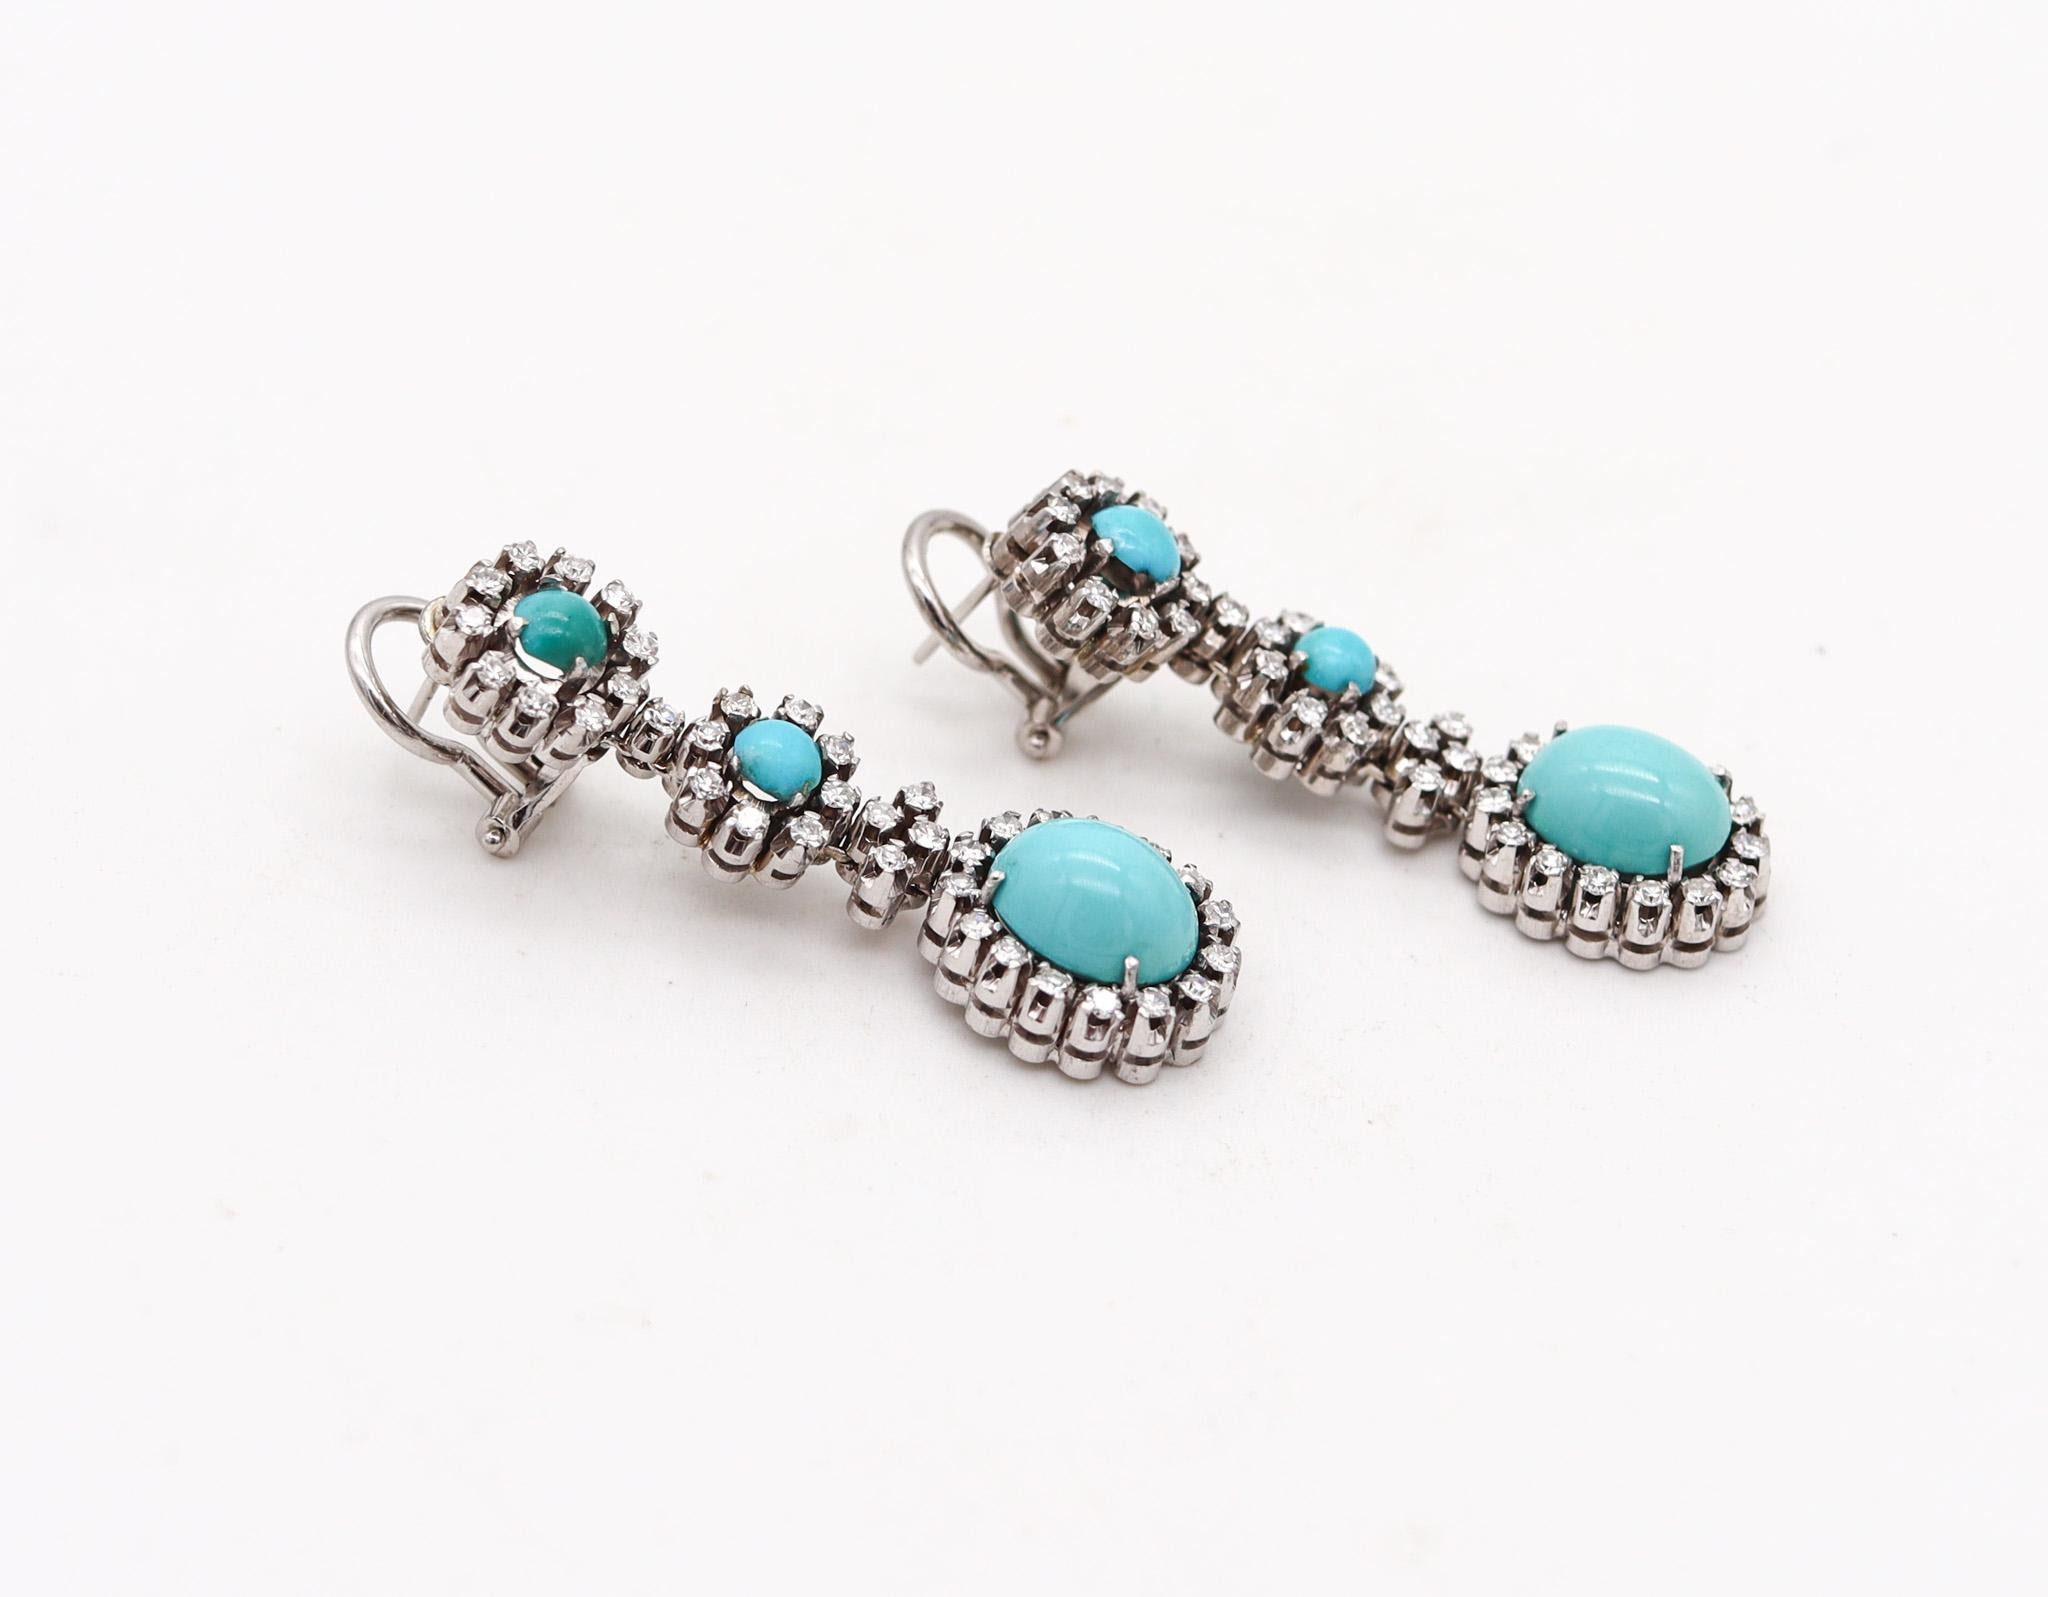 Modernist Italian 1950 Earrings In 18Kt White Gold With 7.22 Ctw In Turquoises And Diamond For Sale